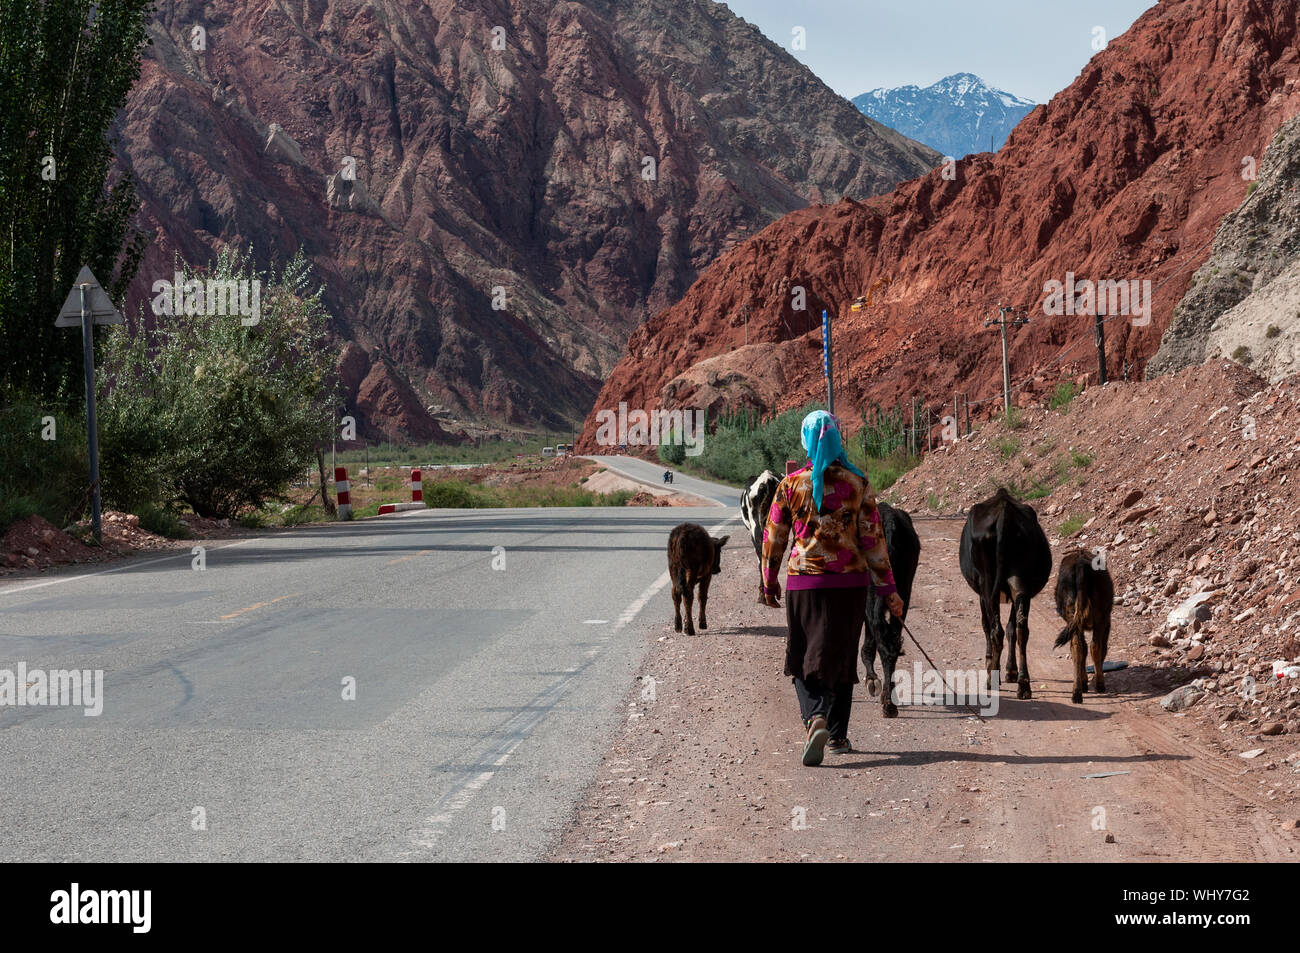 Xinjiang, China - August 15, 2012: A woman leading cows along the Karakoram Highway with the mountains on the background , Xinjiang, China Stock Photo